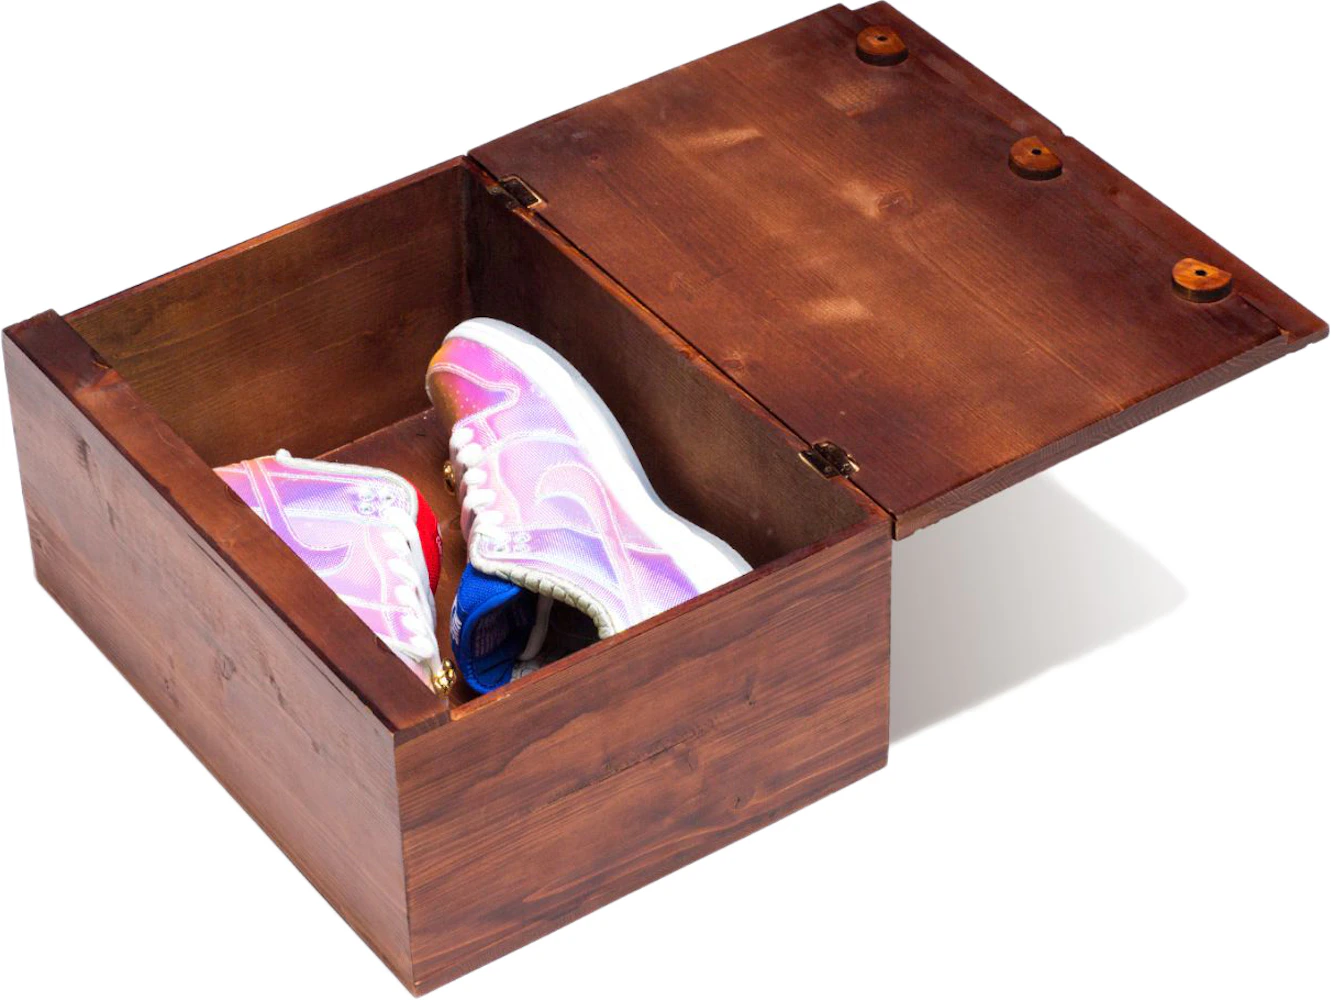 SB Dunk Concepts Holy Grail (Wooden Box) - US